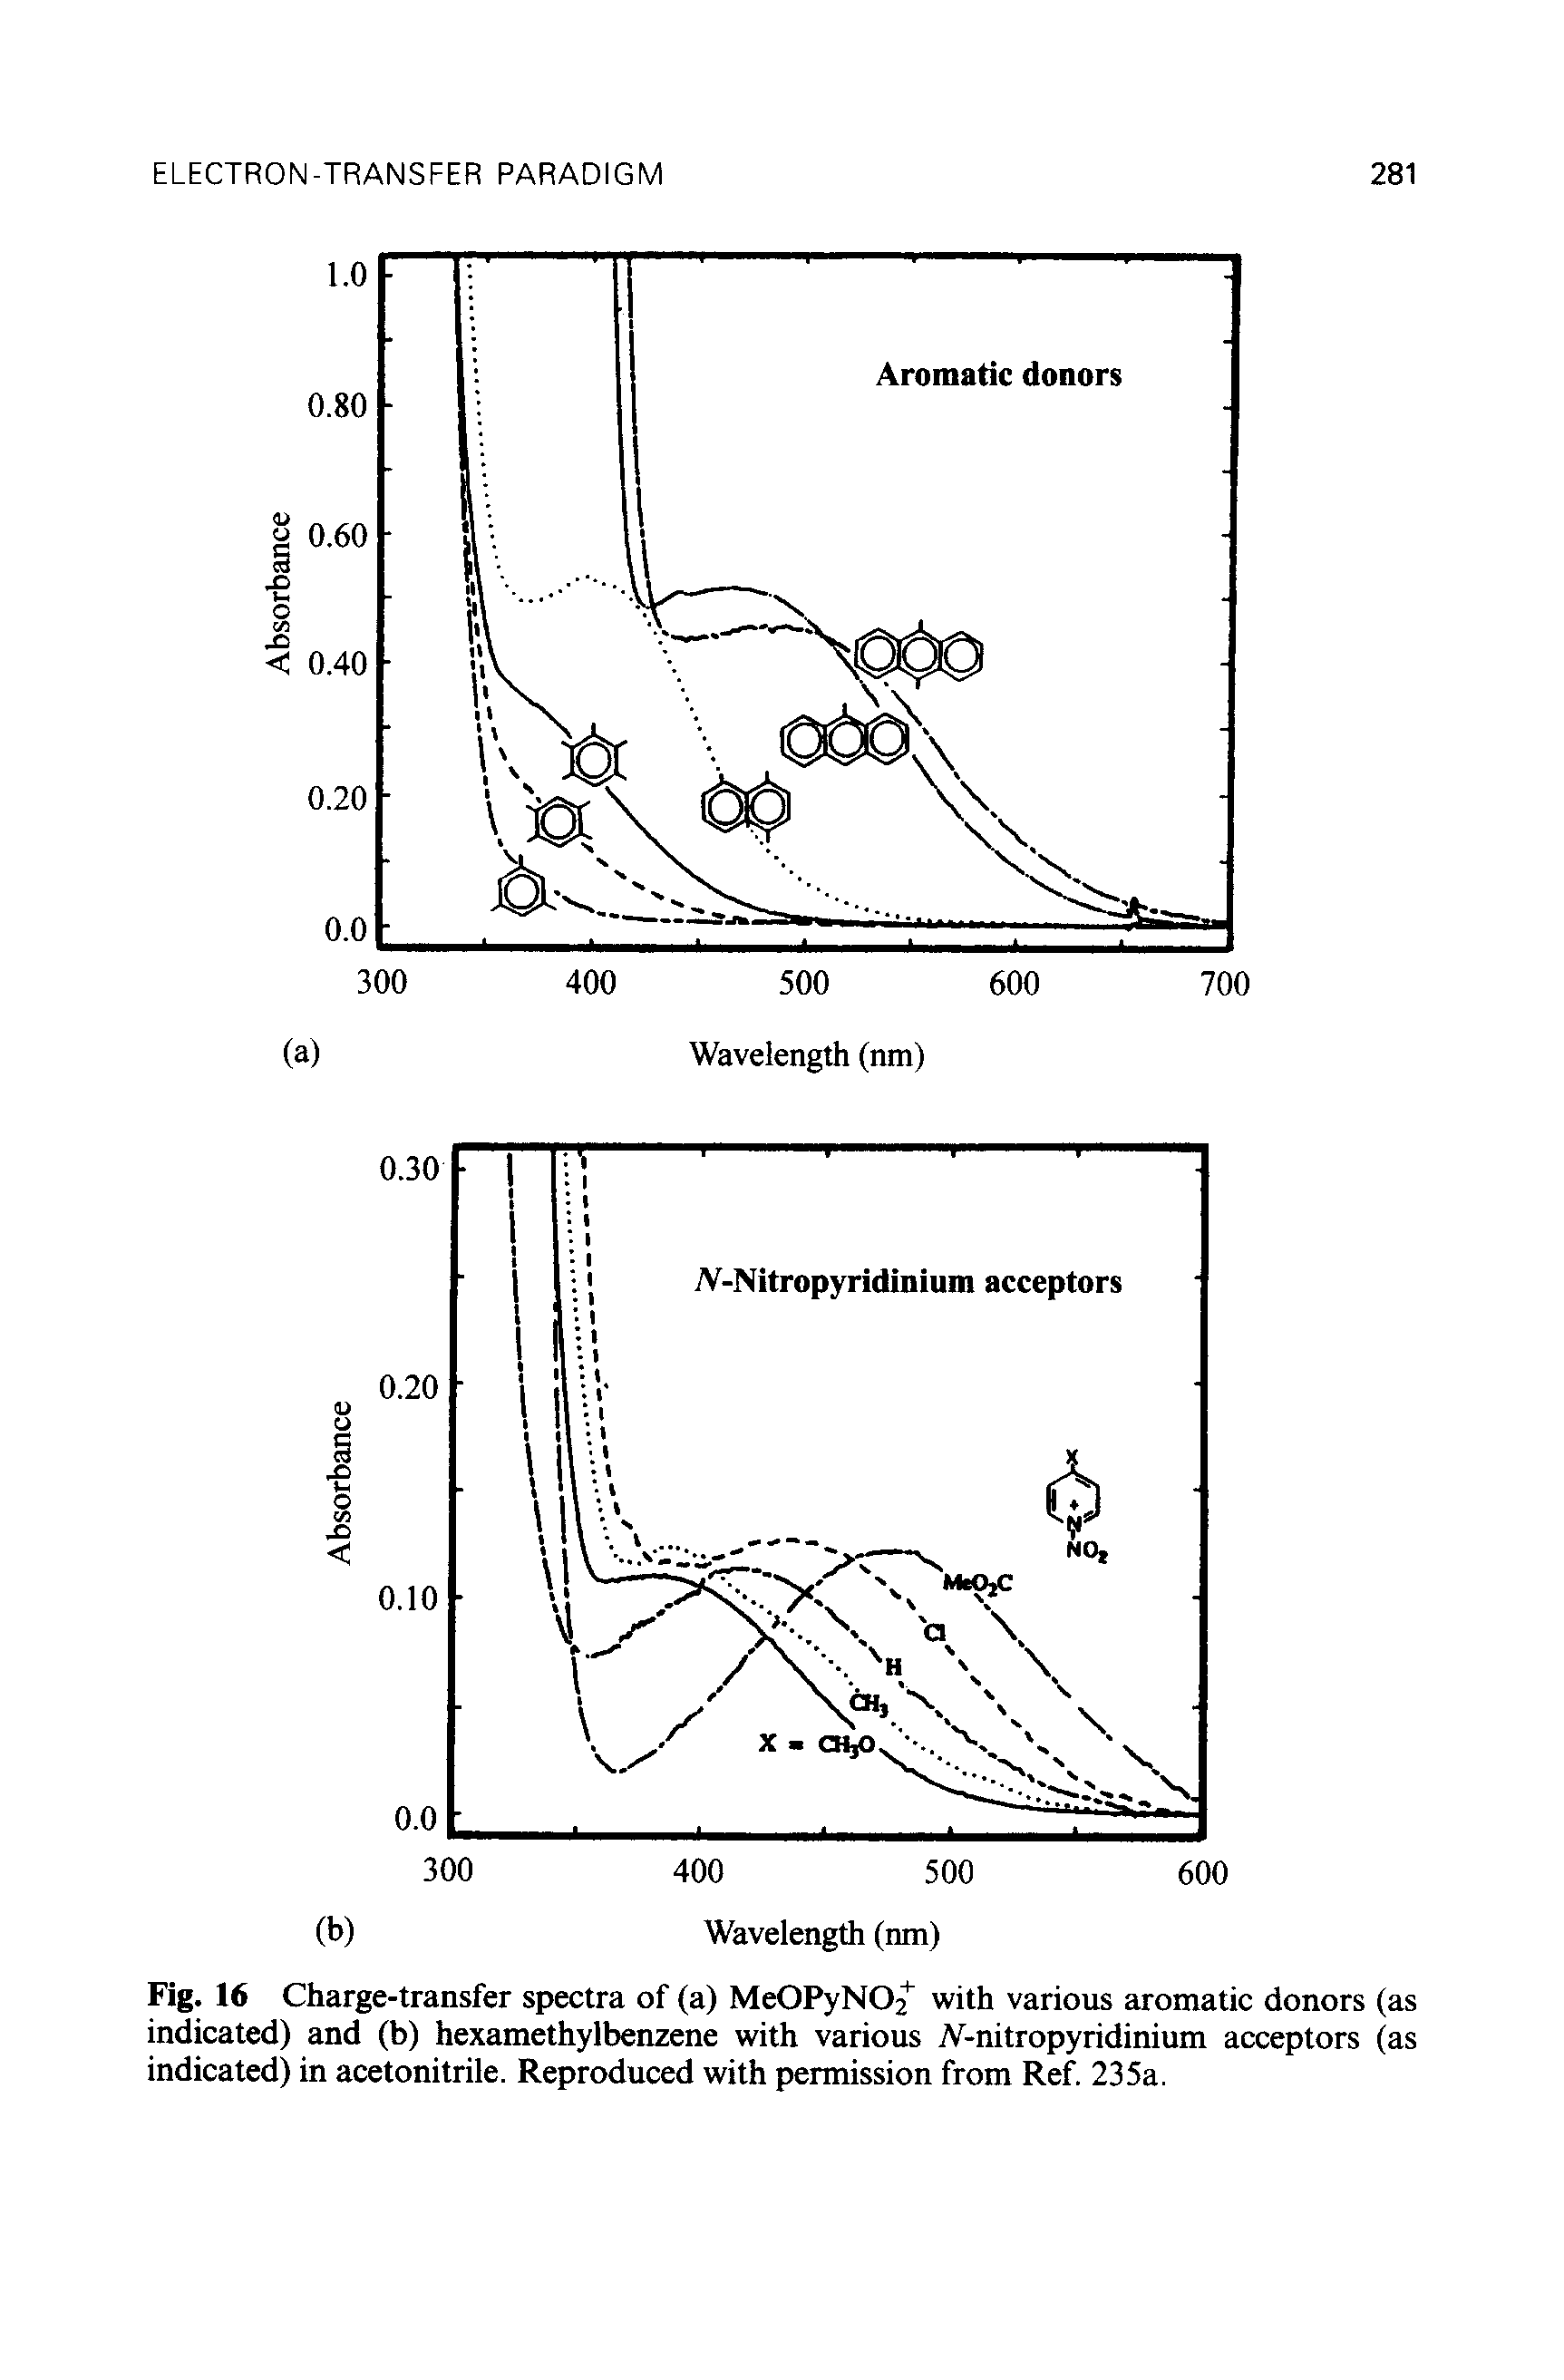 Fig. 16 Charge-transfer spectra of (a) MeOPyN02+ with various aromatic donors (as indicated) and (b) hexamethylbenzene with various TV-nitropyridinium acceptors (as indicated) in acetonitrile. Reproduced with permission from Ref. 235a.